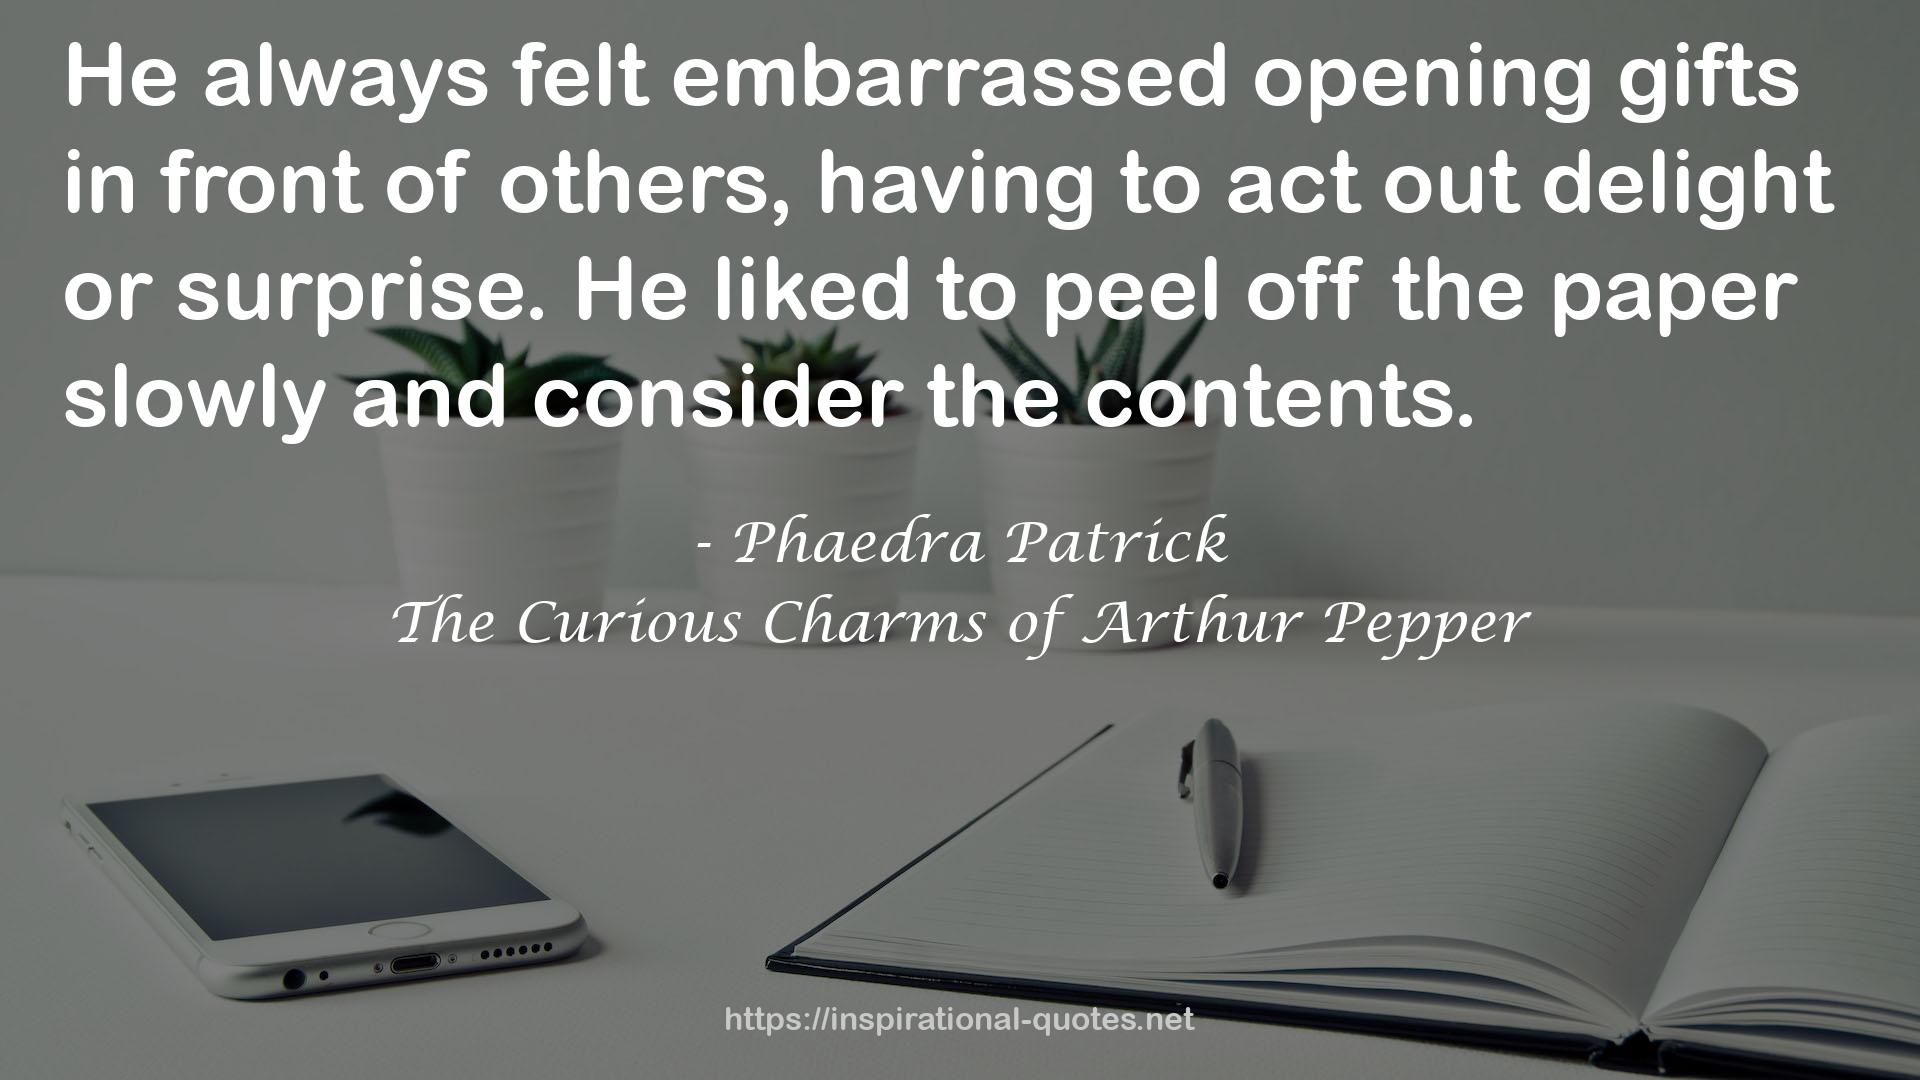 The Curious Charms of Arthur Pepper QUOTES